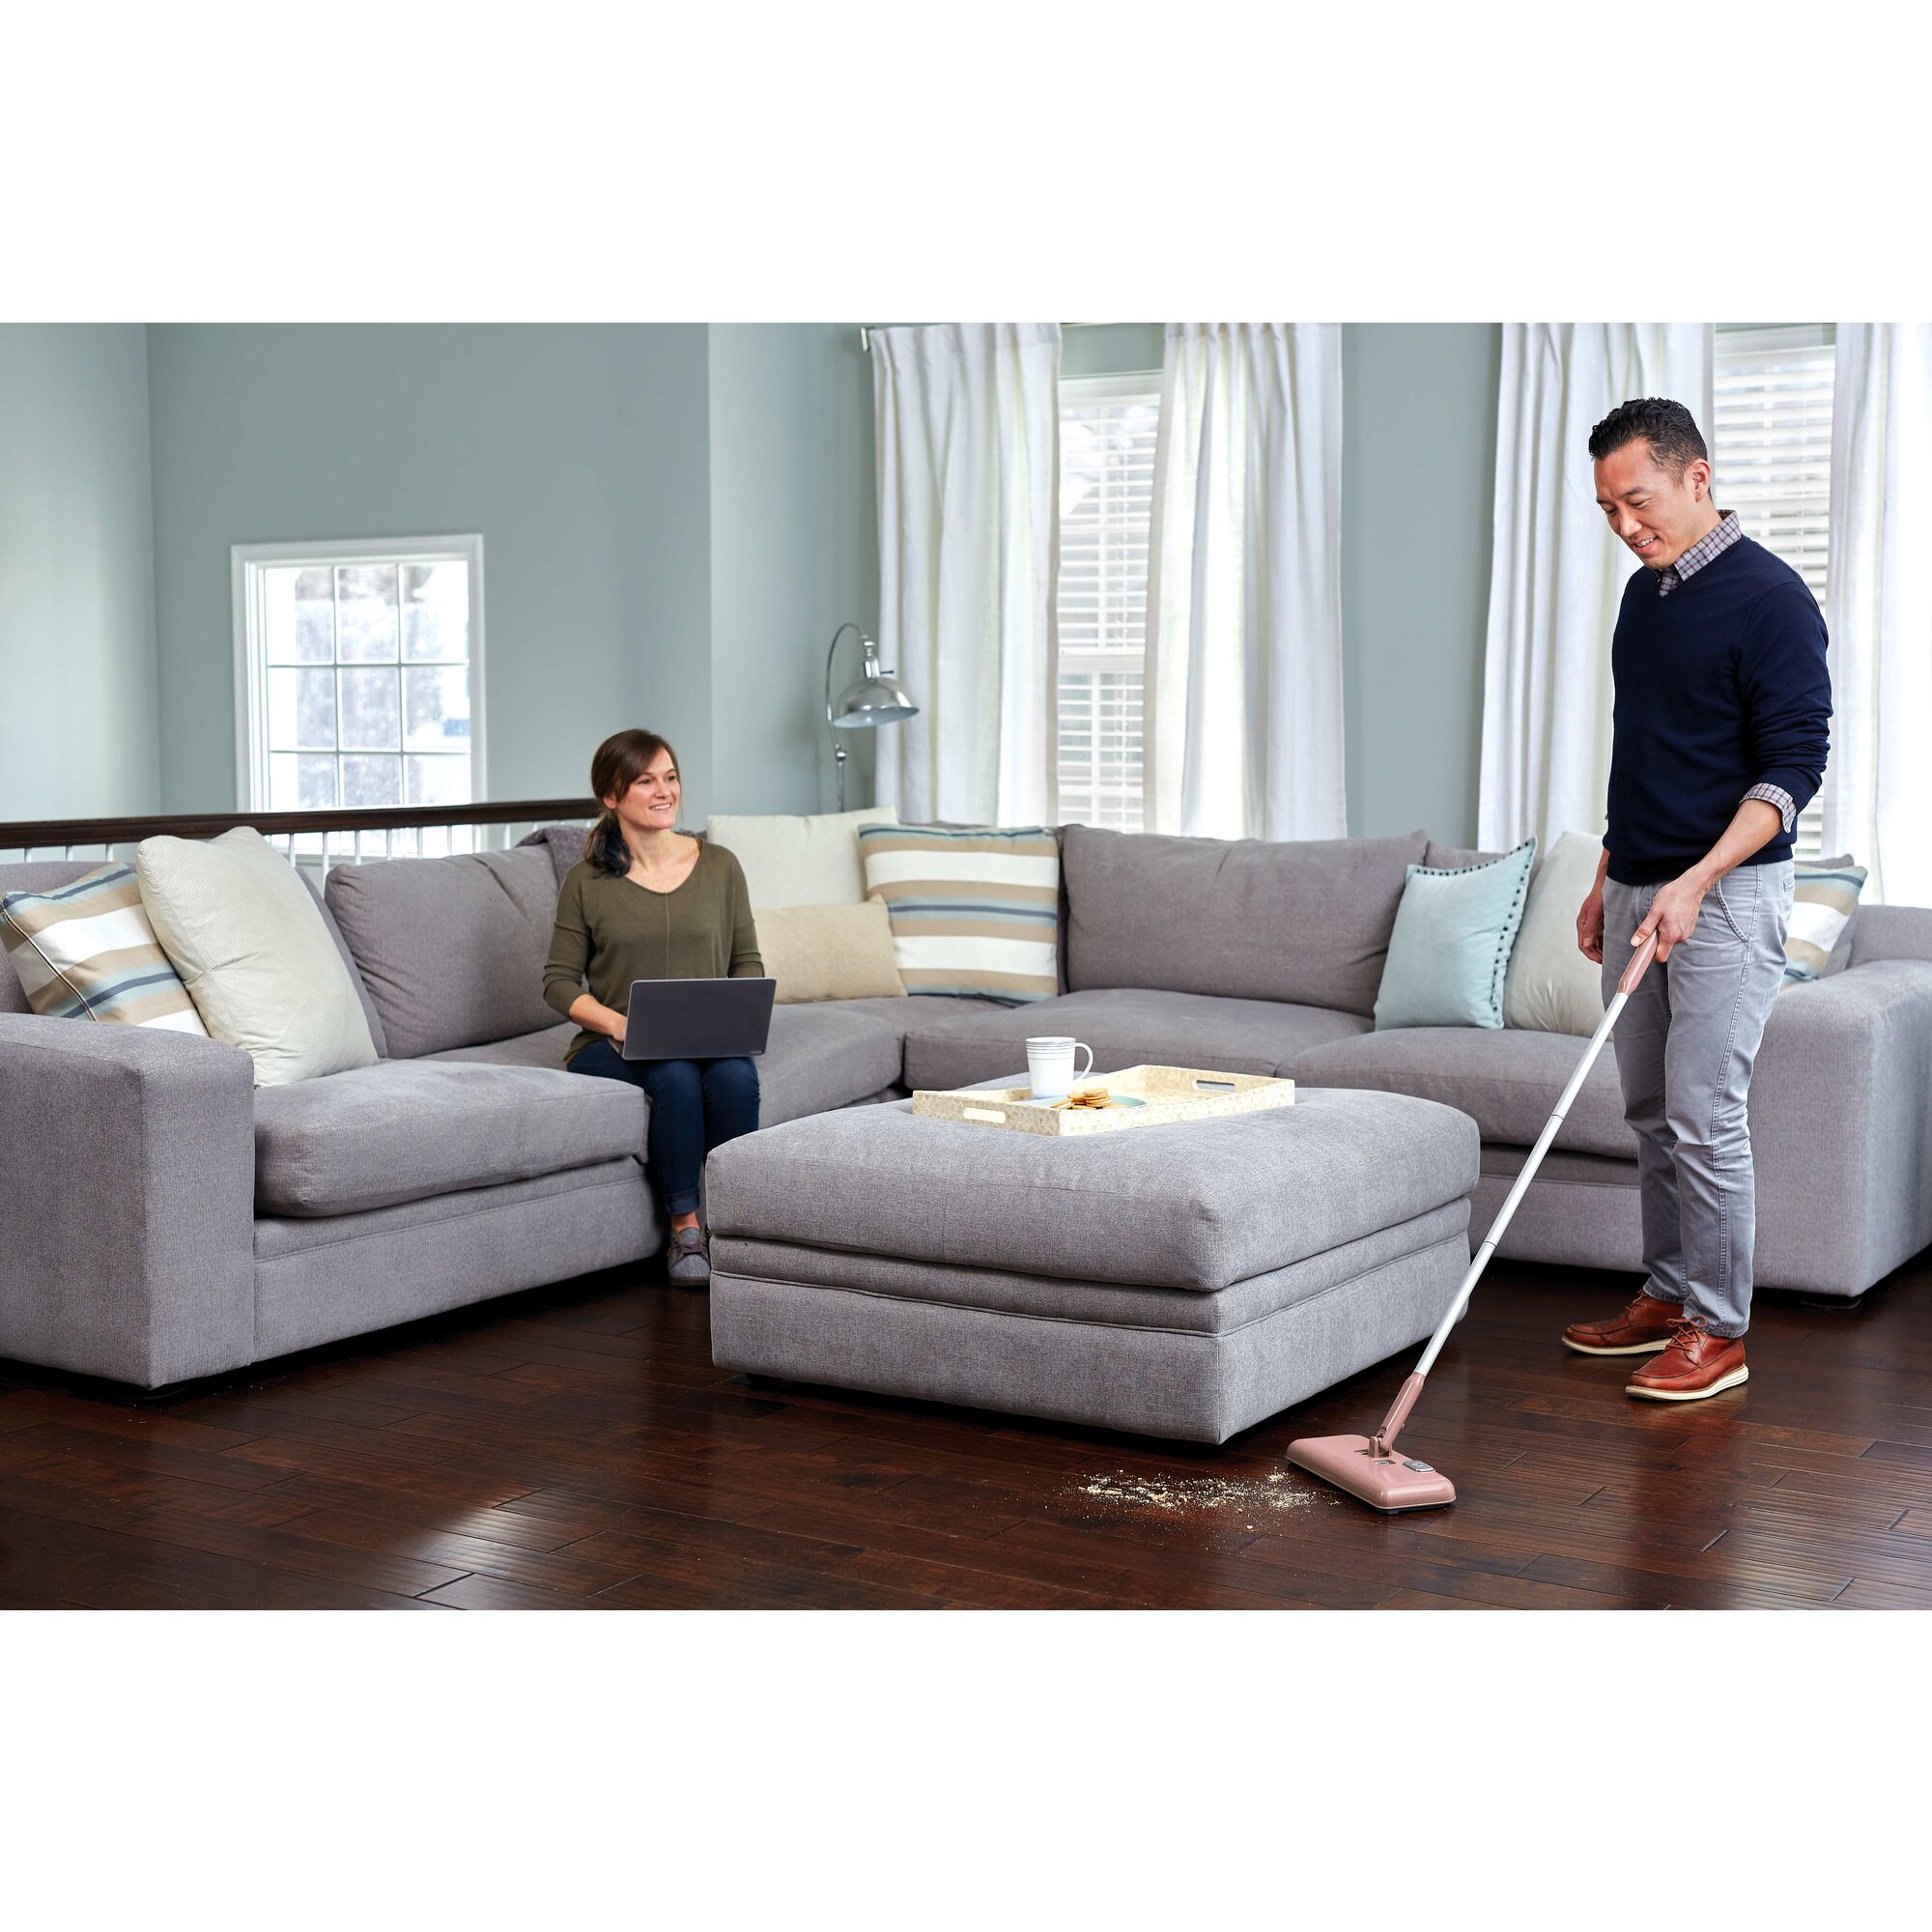 Powered Floor Sweeper being used by person to clean messy floor in sitting area of house.